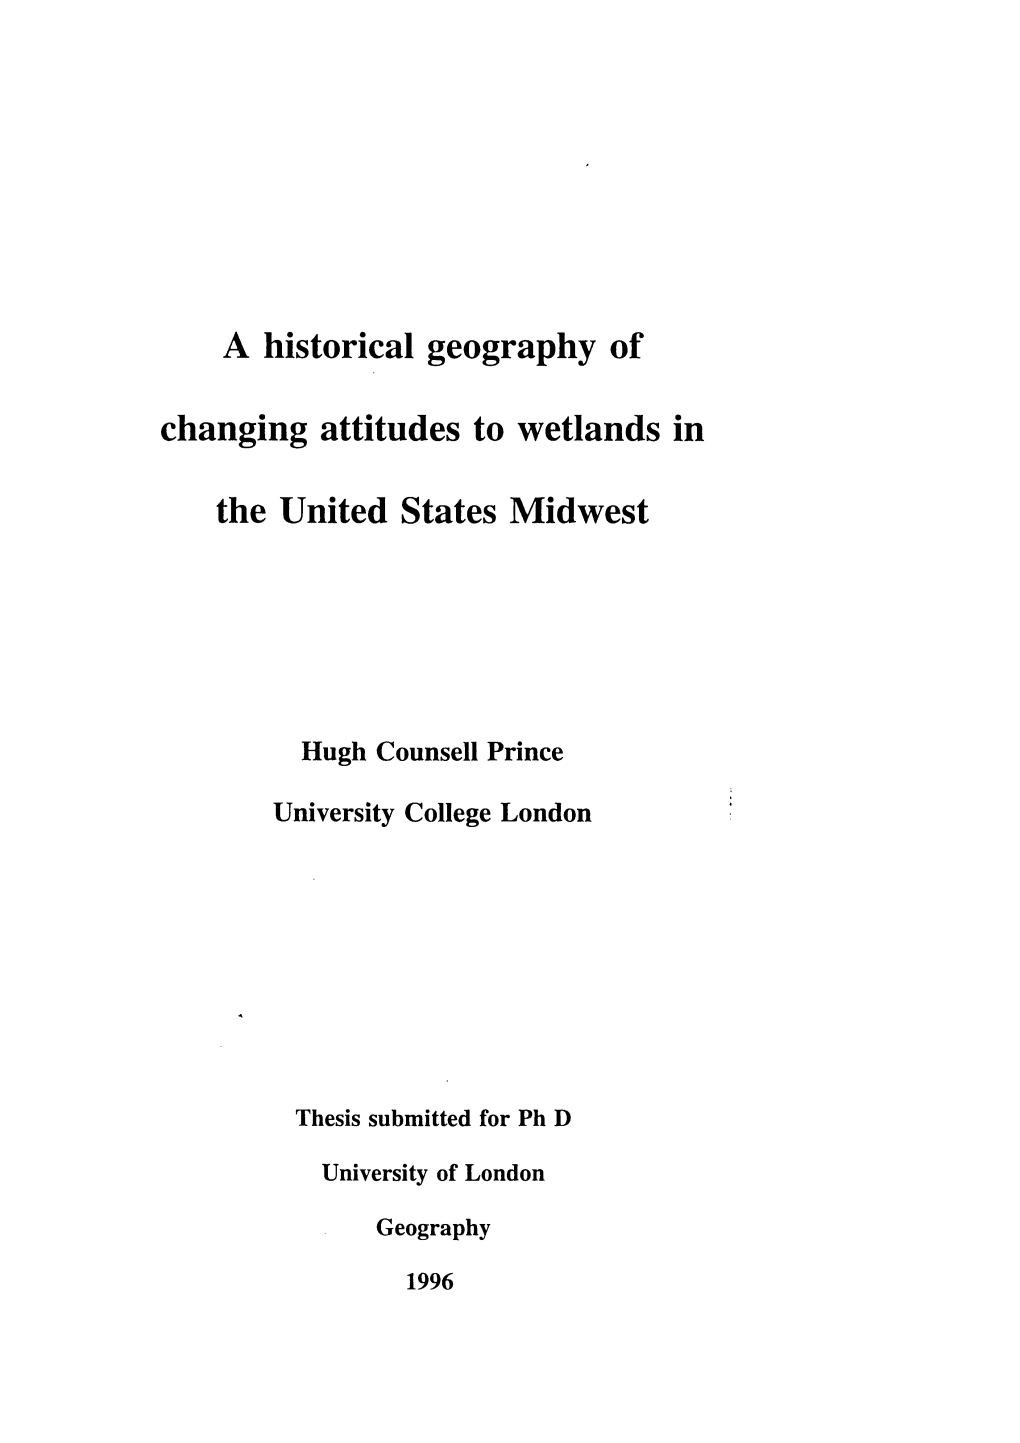 A Historical Geography of Changing Attitudes to Wetlands in the United